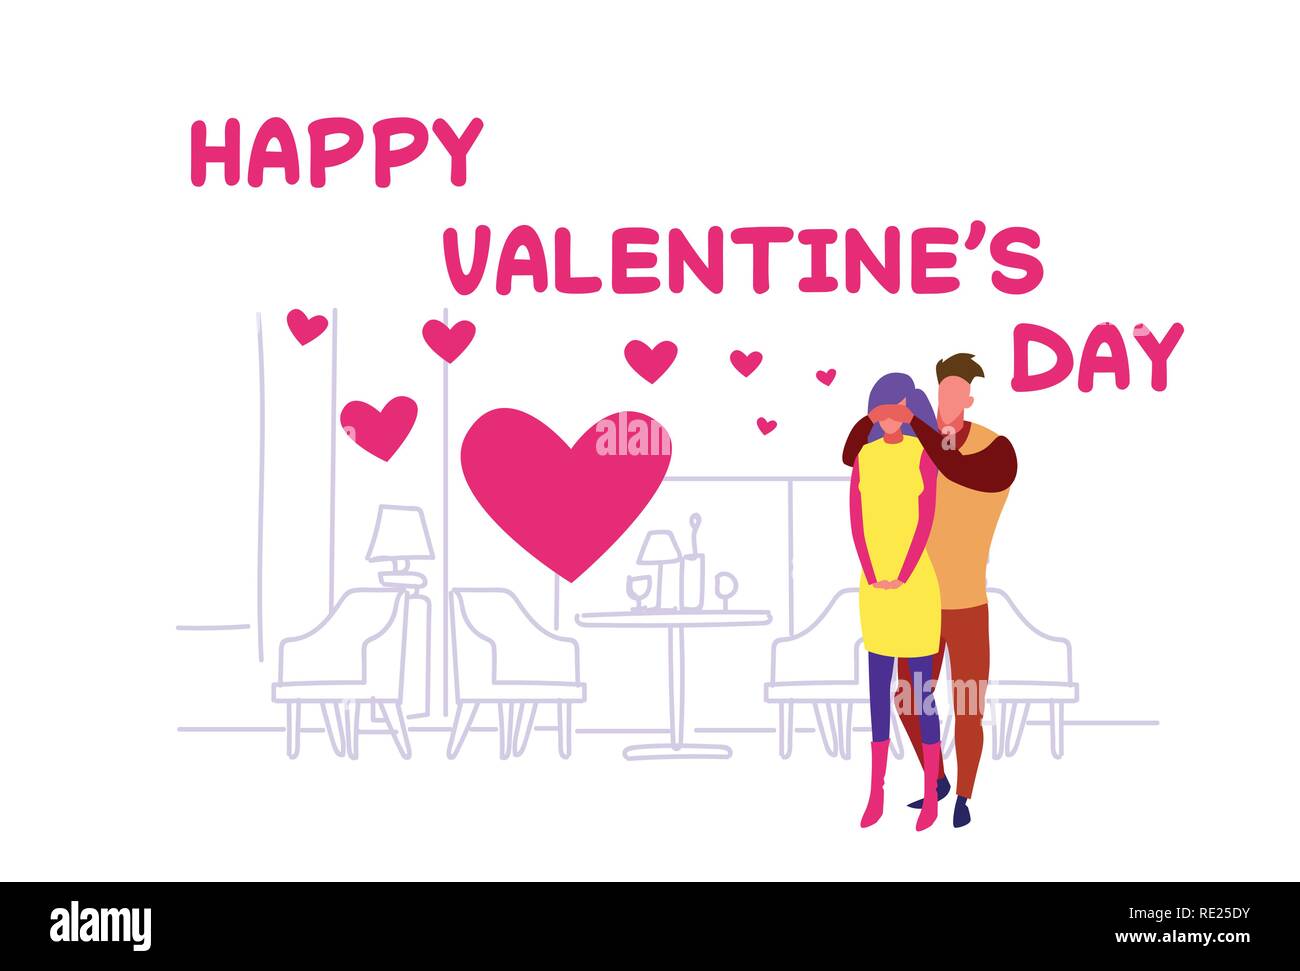 man closing womans eyes playing guess who game happy valentines day couple in love over heart shapes modern cafe interior sketch doodle greeting card horizontal Stock Vector